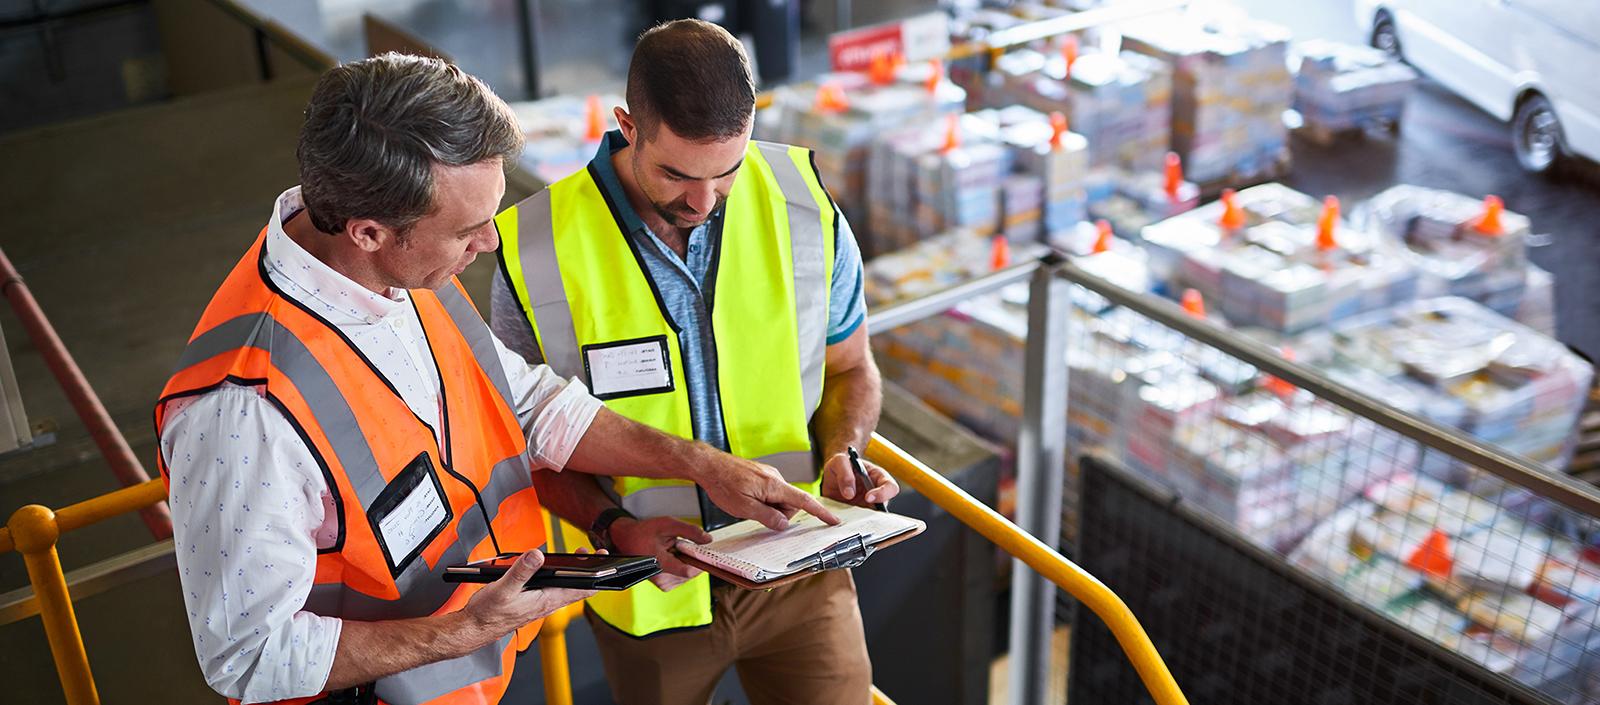 Shot of two warehouse workers standing on stairs using a digital tablet and looking at paperwork.